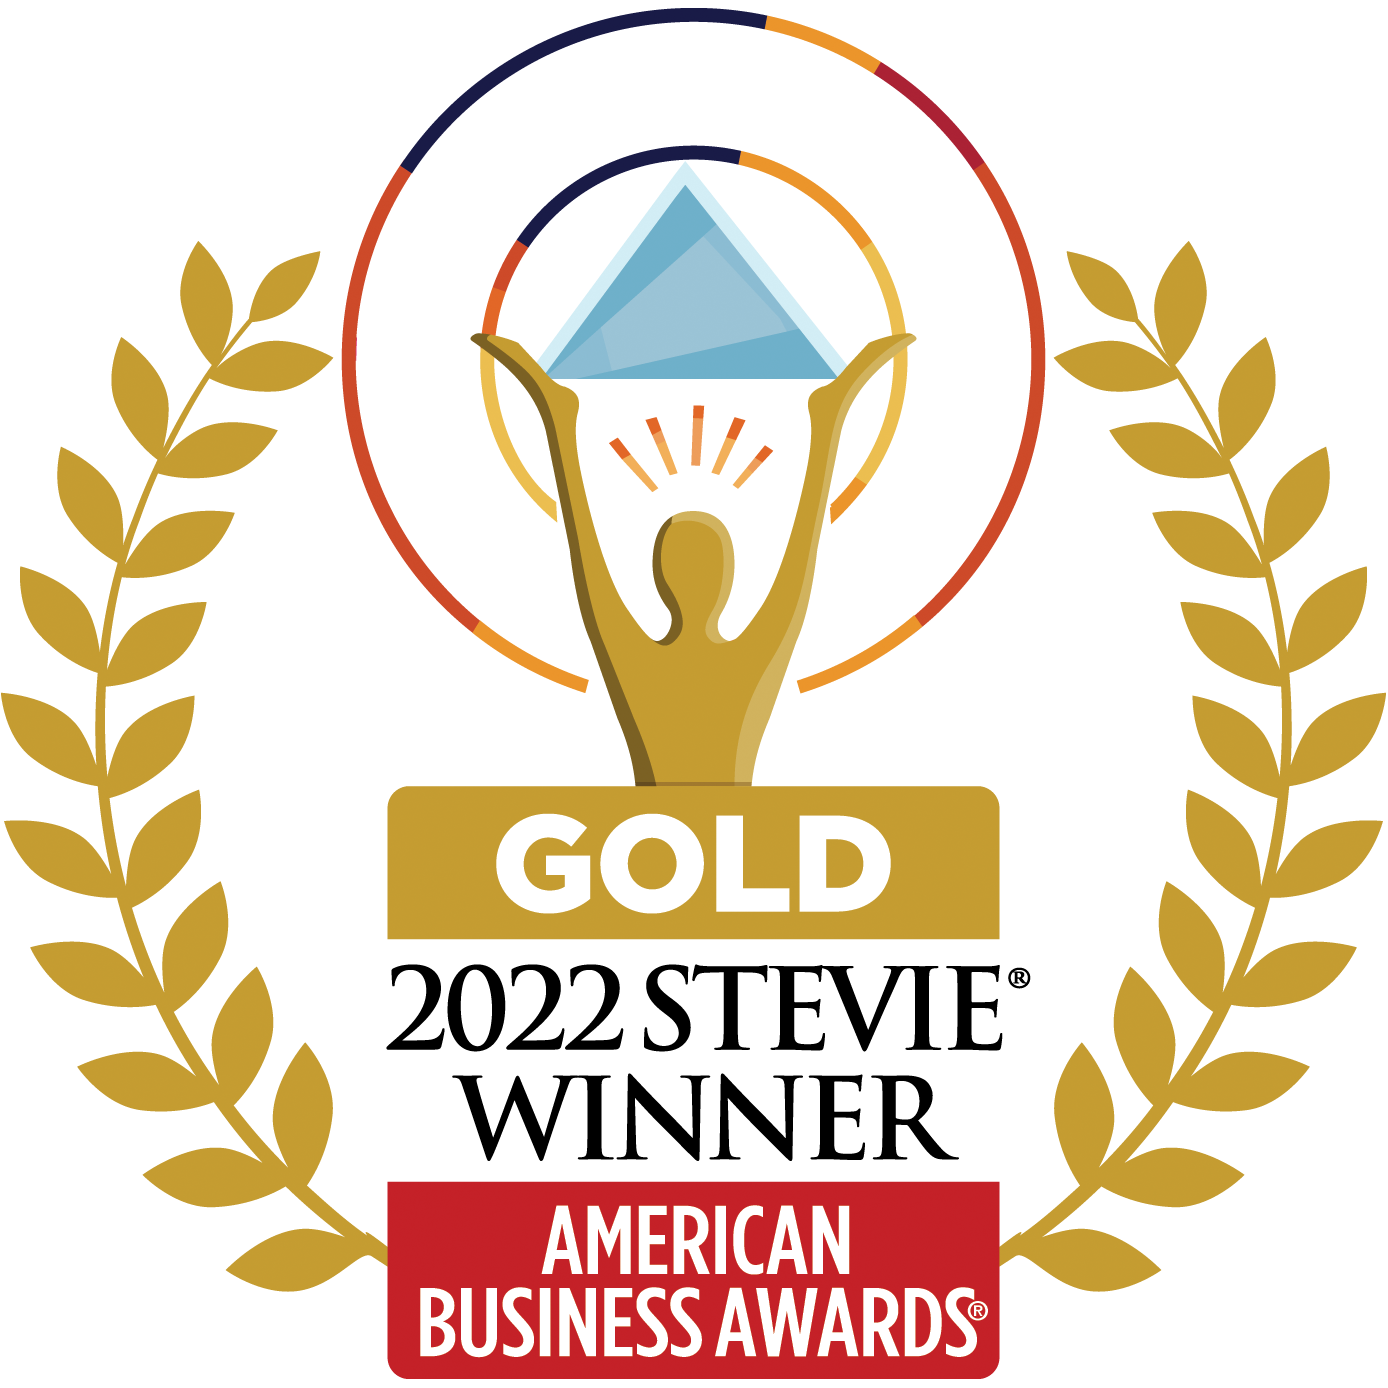 5WPR Awarded Gold Stevie for PR Campaign of the Year, Business to Business, for E2open Biden Supply Chain Plan